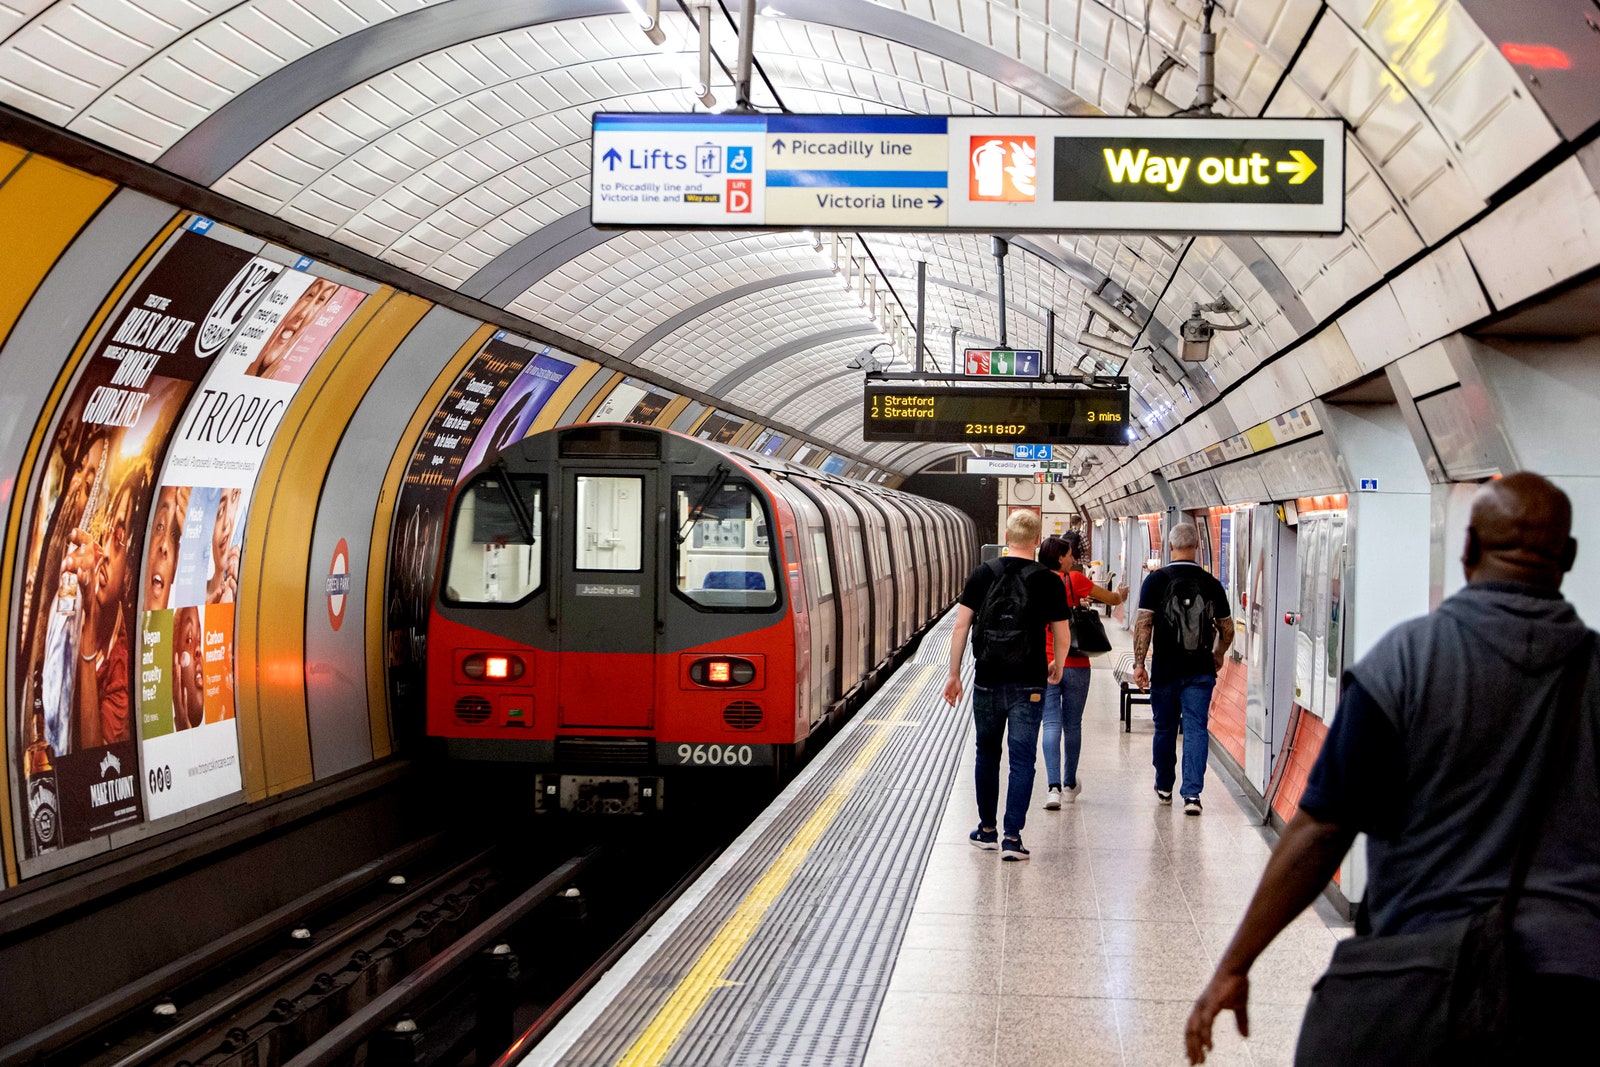 London Underground Is Testing Real-Time AI Surveillance Tools to Spot Crime